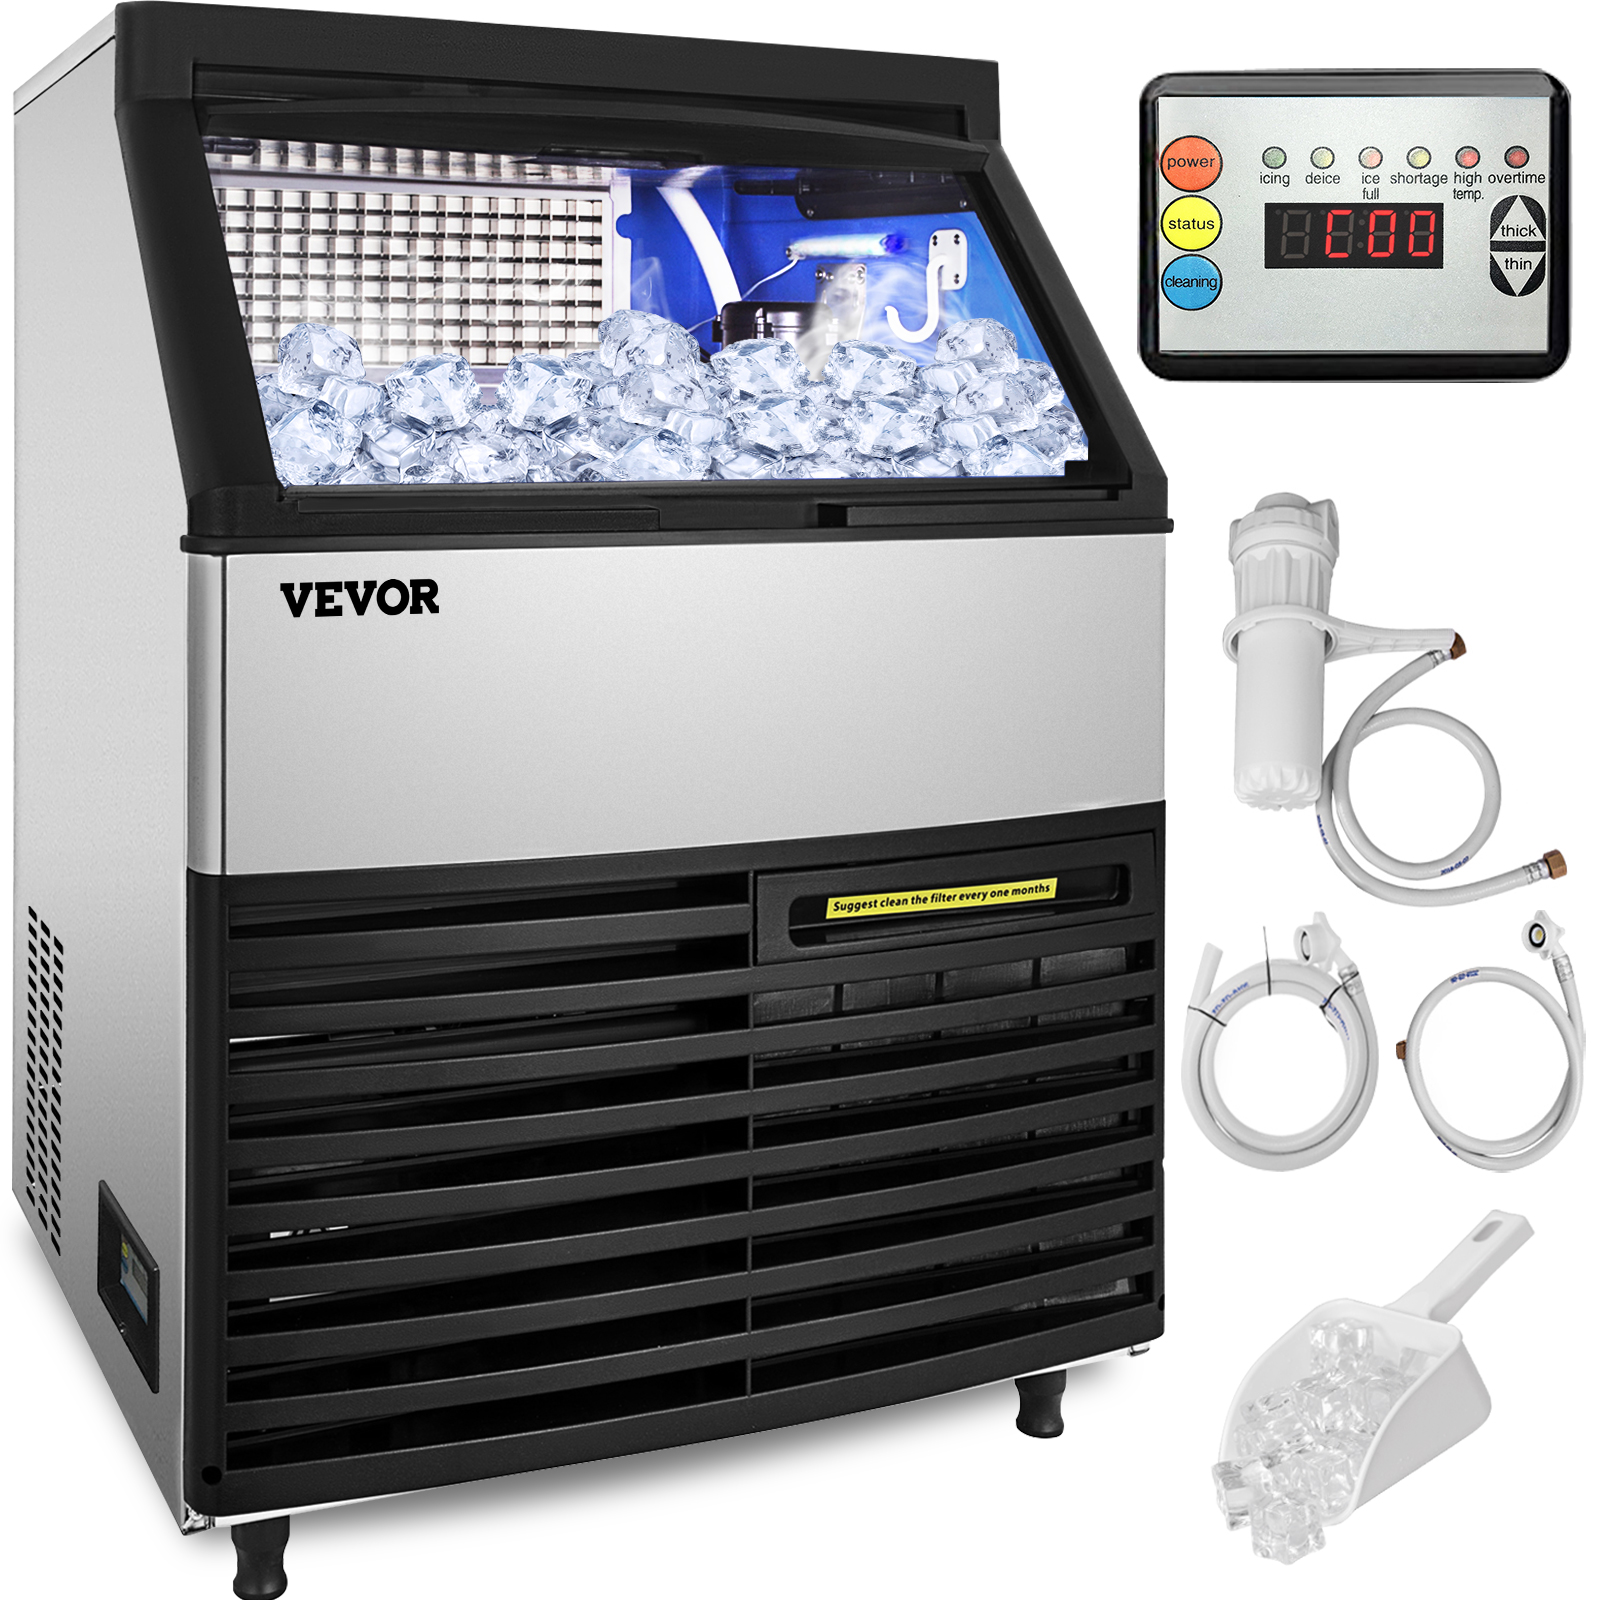 VEVOR 110V Commercial Ice Machine 320LBS/24H with 77lbs Bin, Clear Cube LED Panel, Stainless Steel, Air Cooling, ETL Approved, Professional